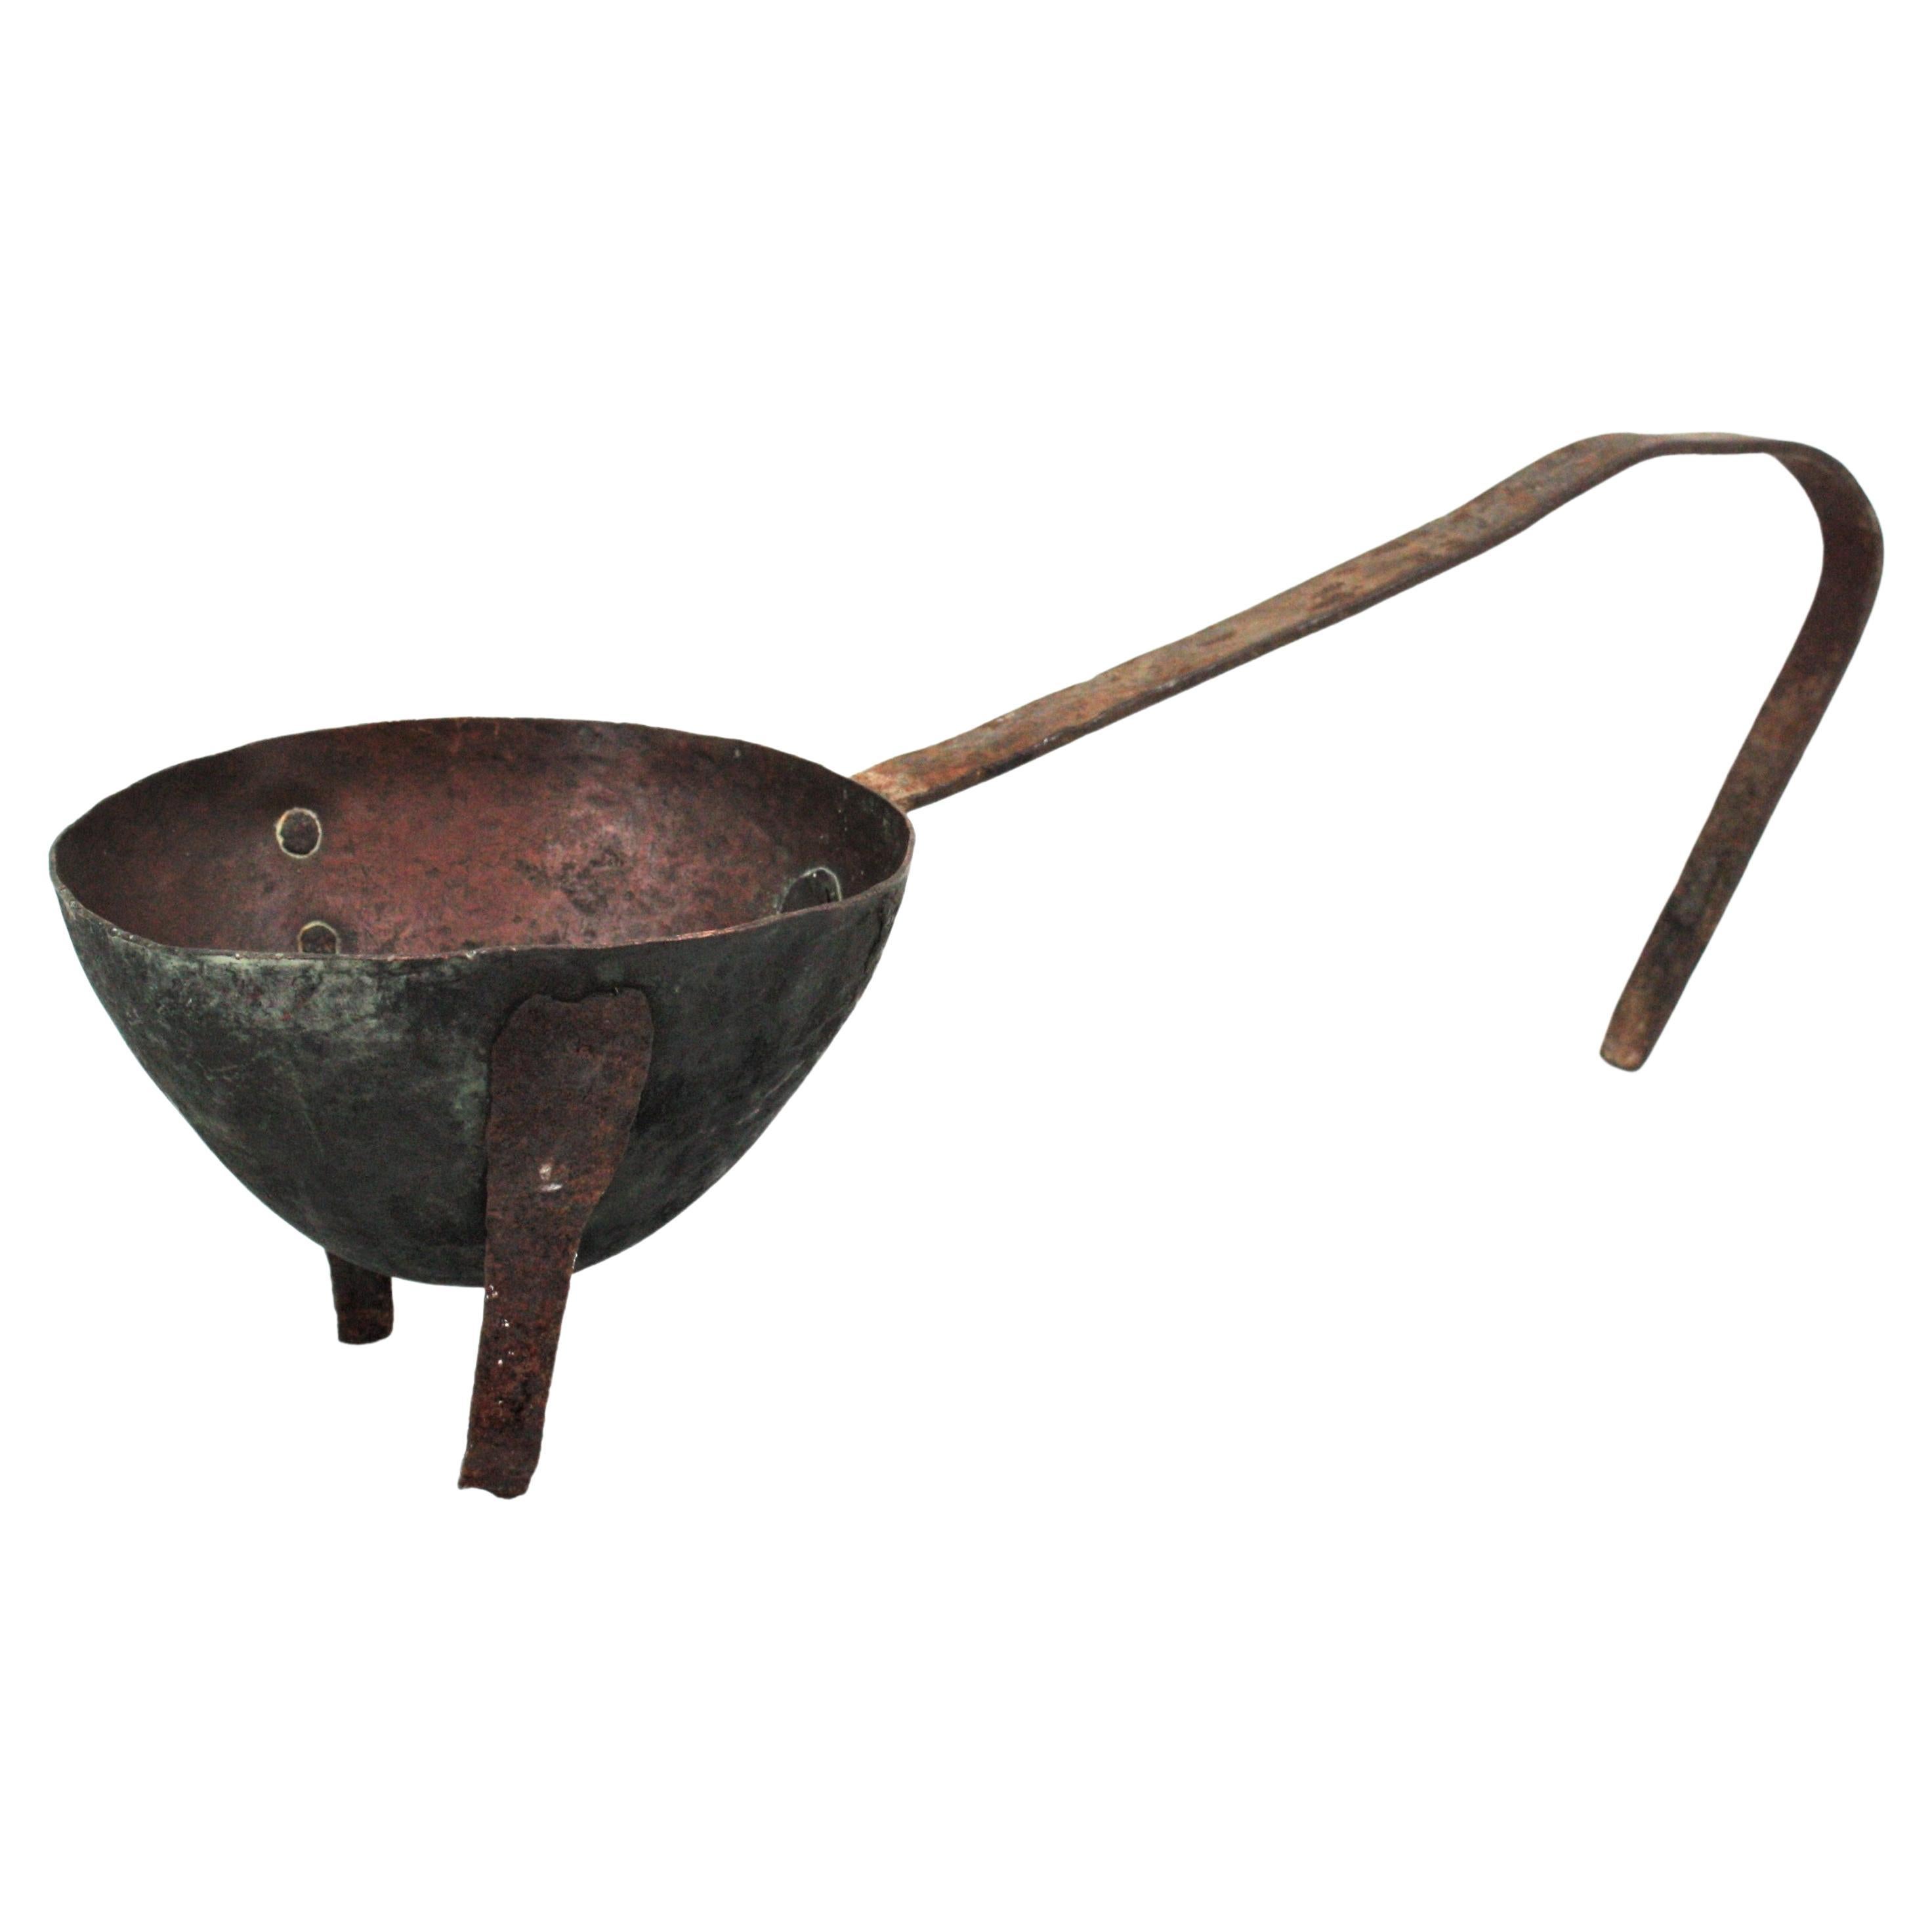 Spanish Foundry Smelting Tool as Centerpiece, Copper and Iron